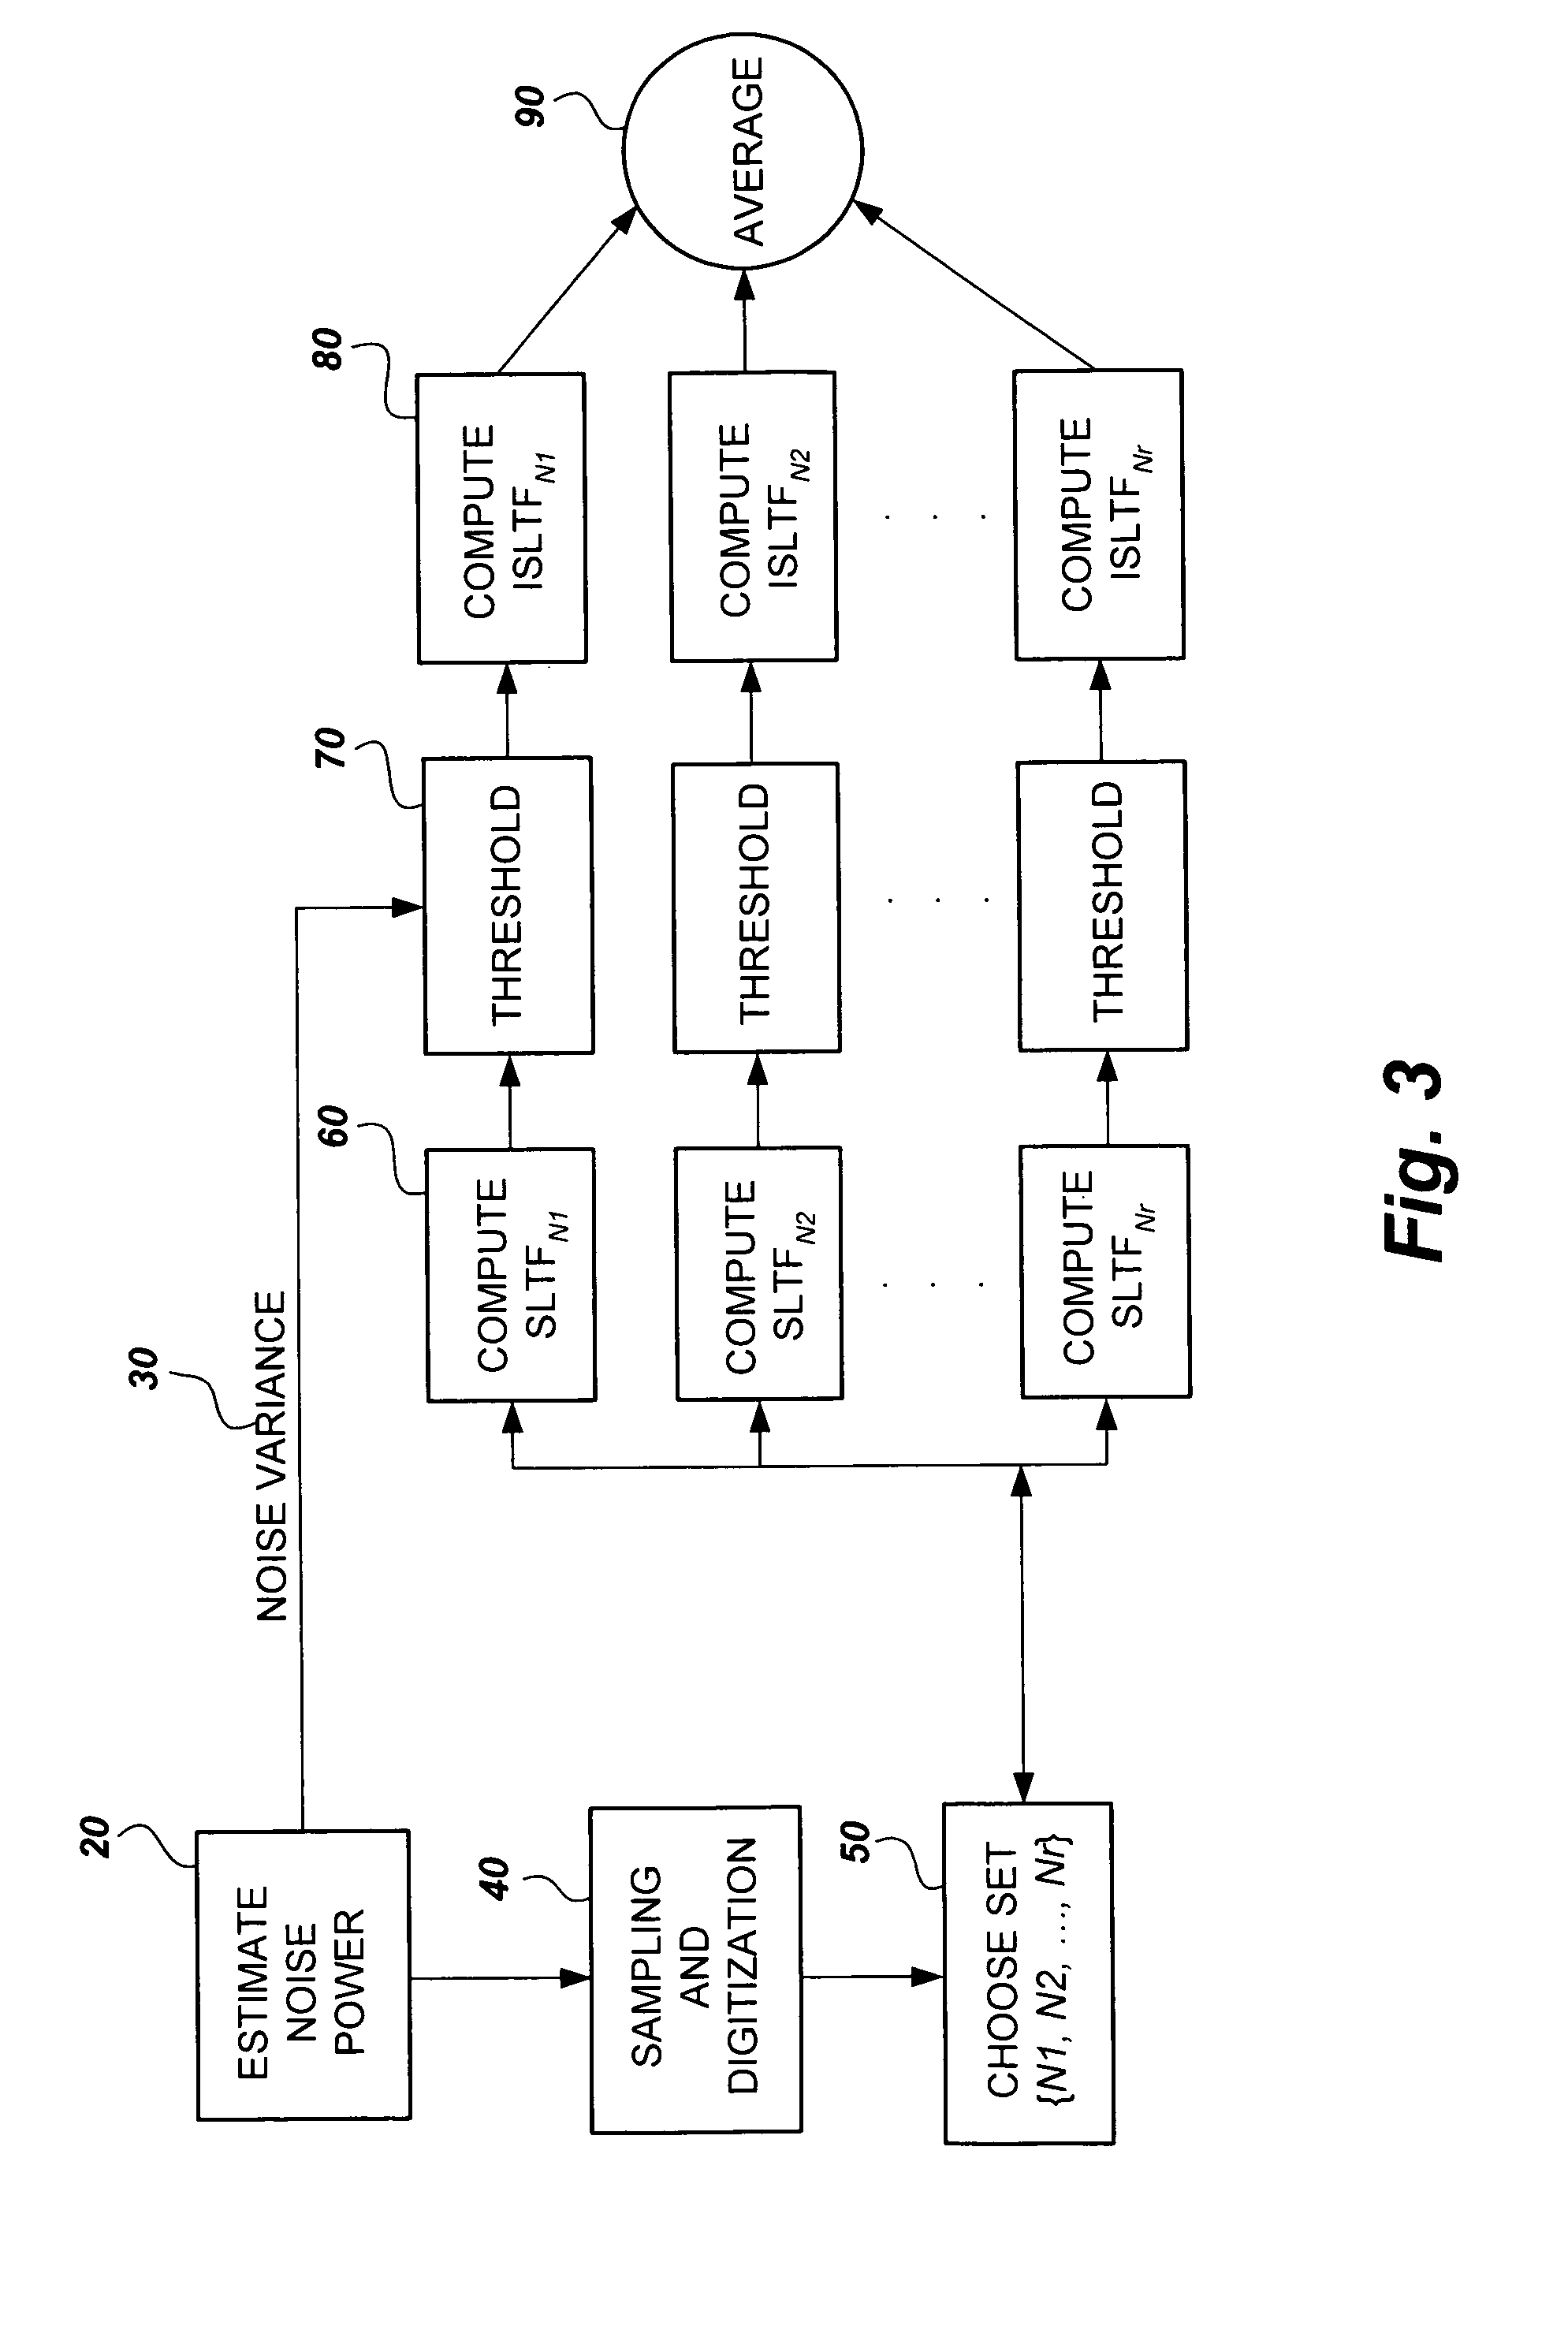 Method for removing noise from nuclear magnetic resonance signals and images